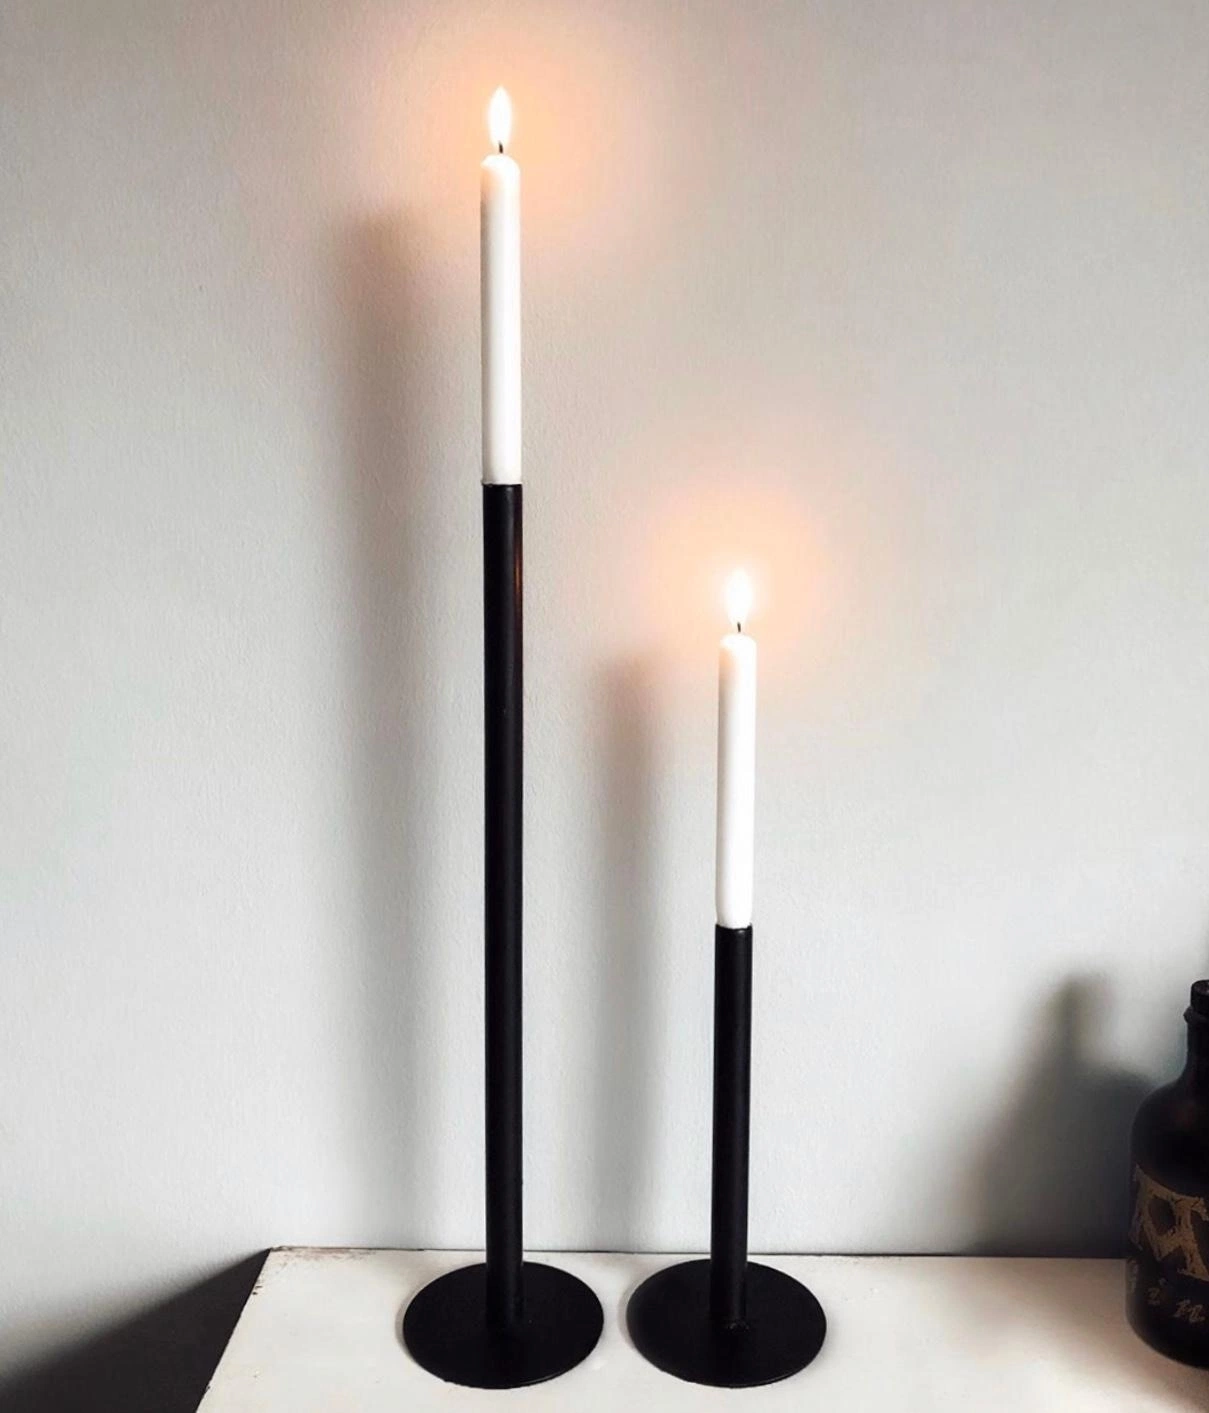 Party Decorative Candlestick Holder as a Gift